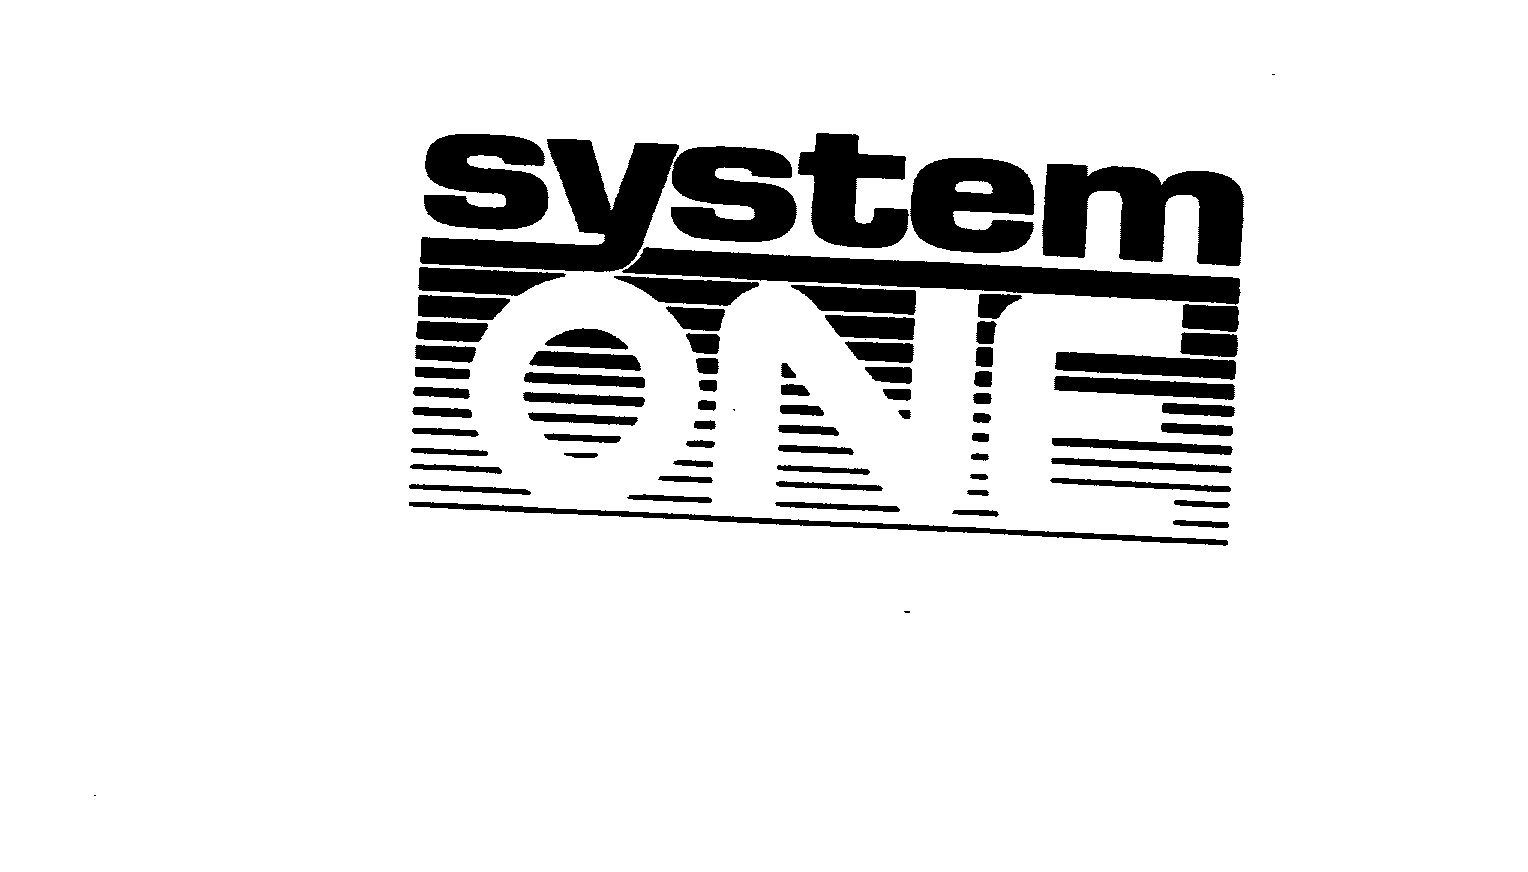 SYSTEM ONE